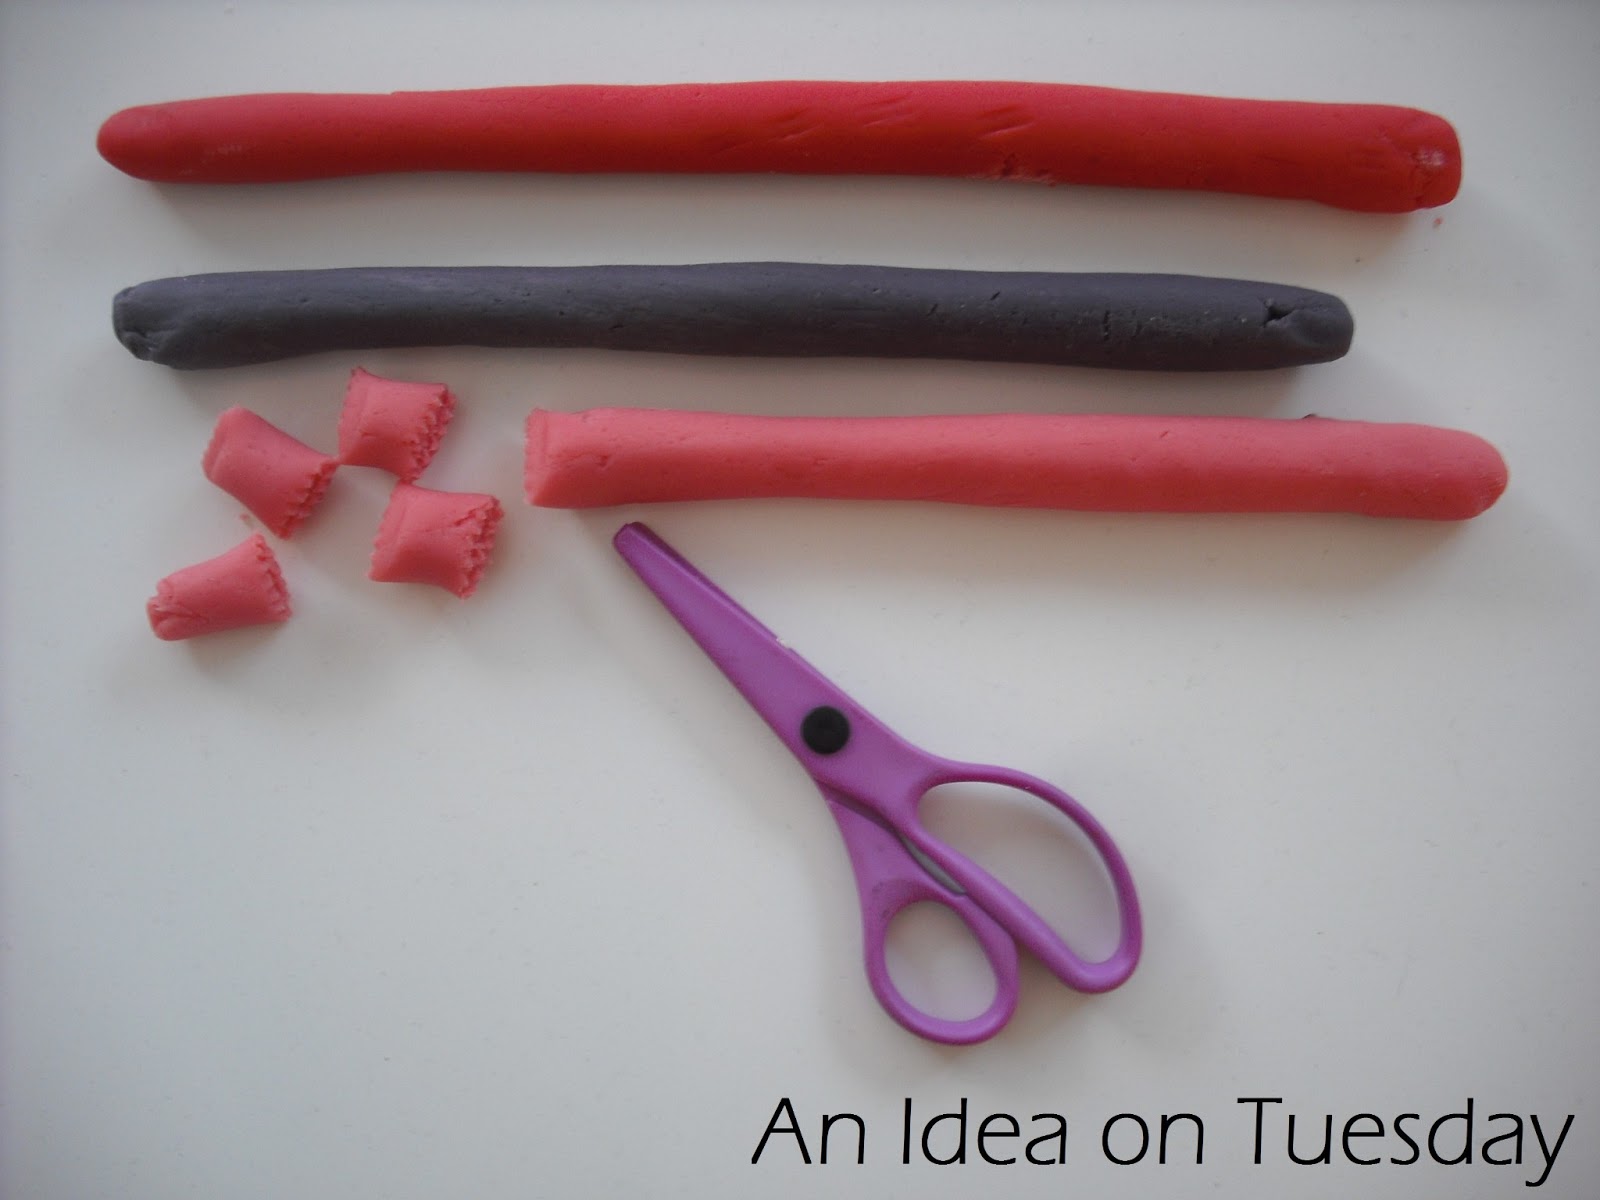 An idea on Tuesday: Learning to Use Scissors